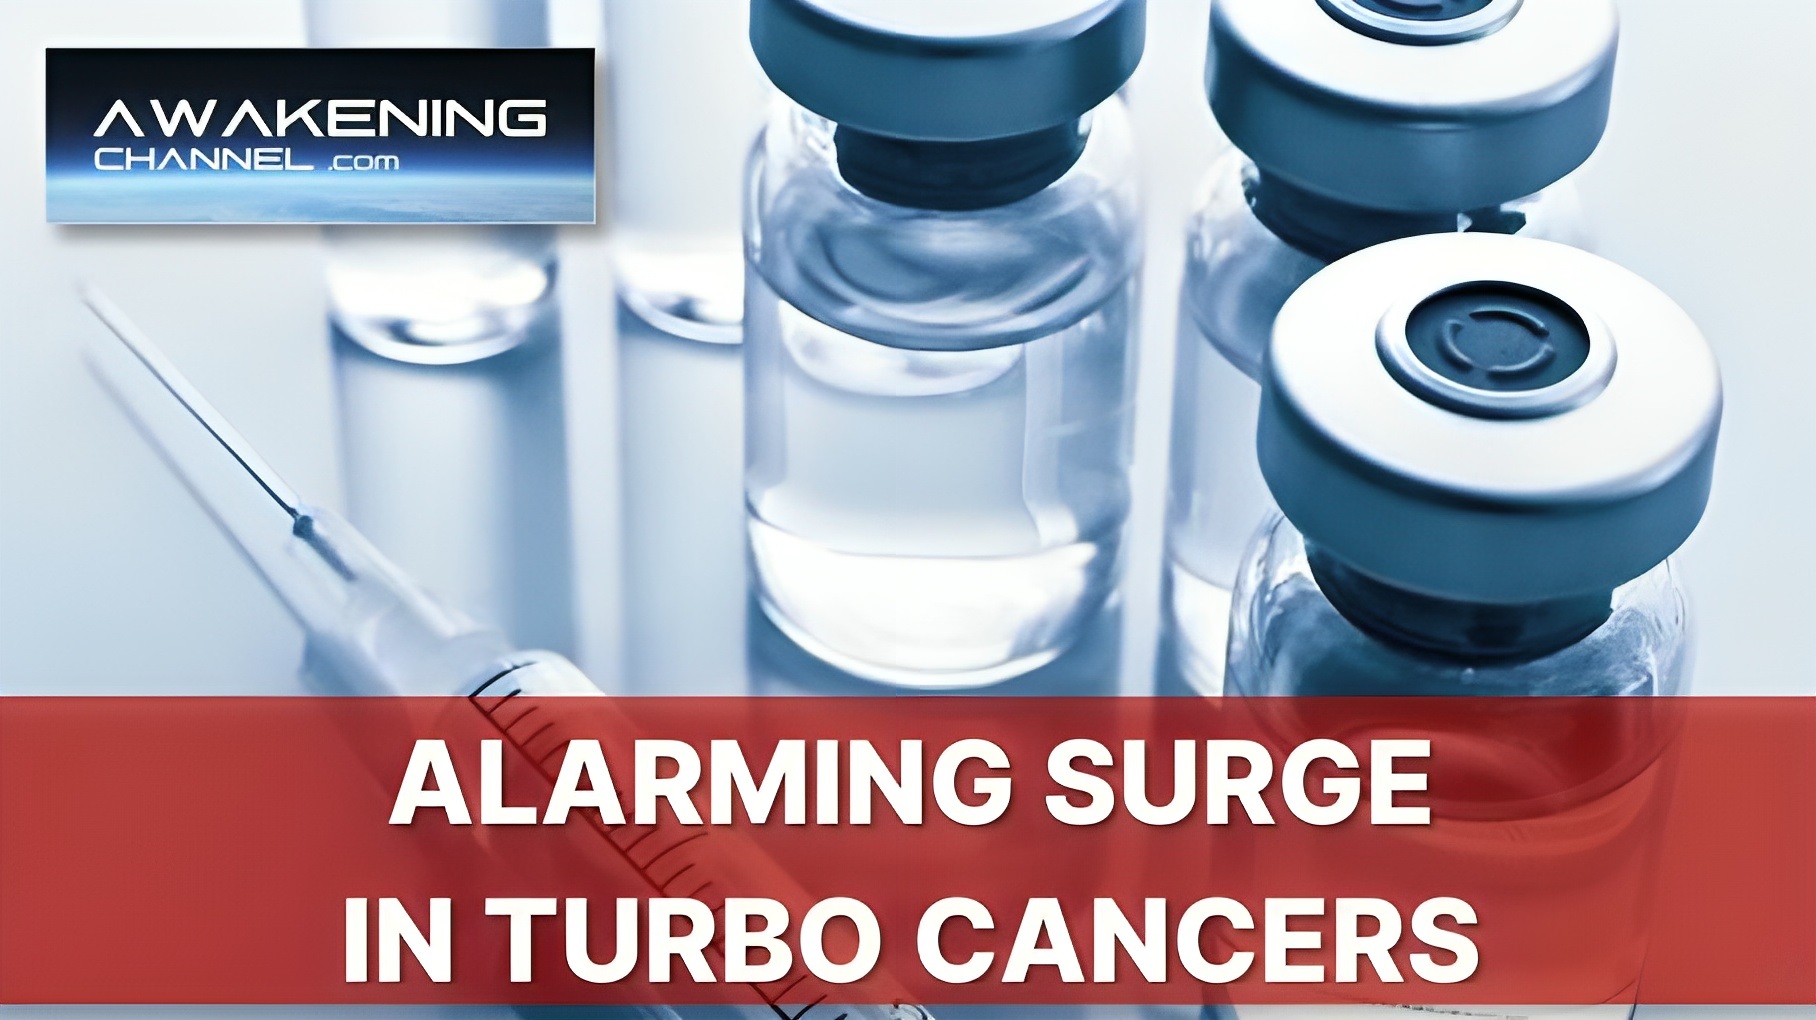 Alarming Surge In Turbo Cancers